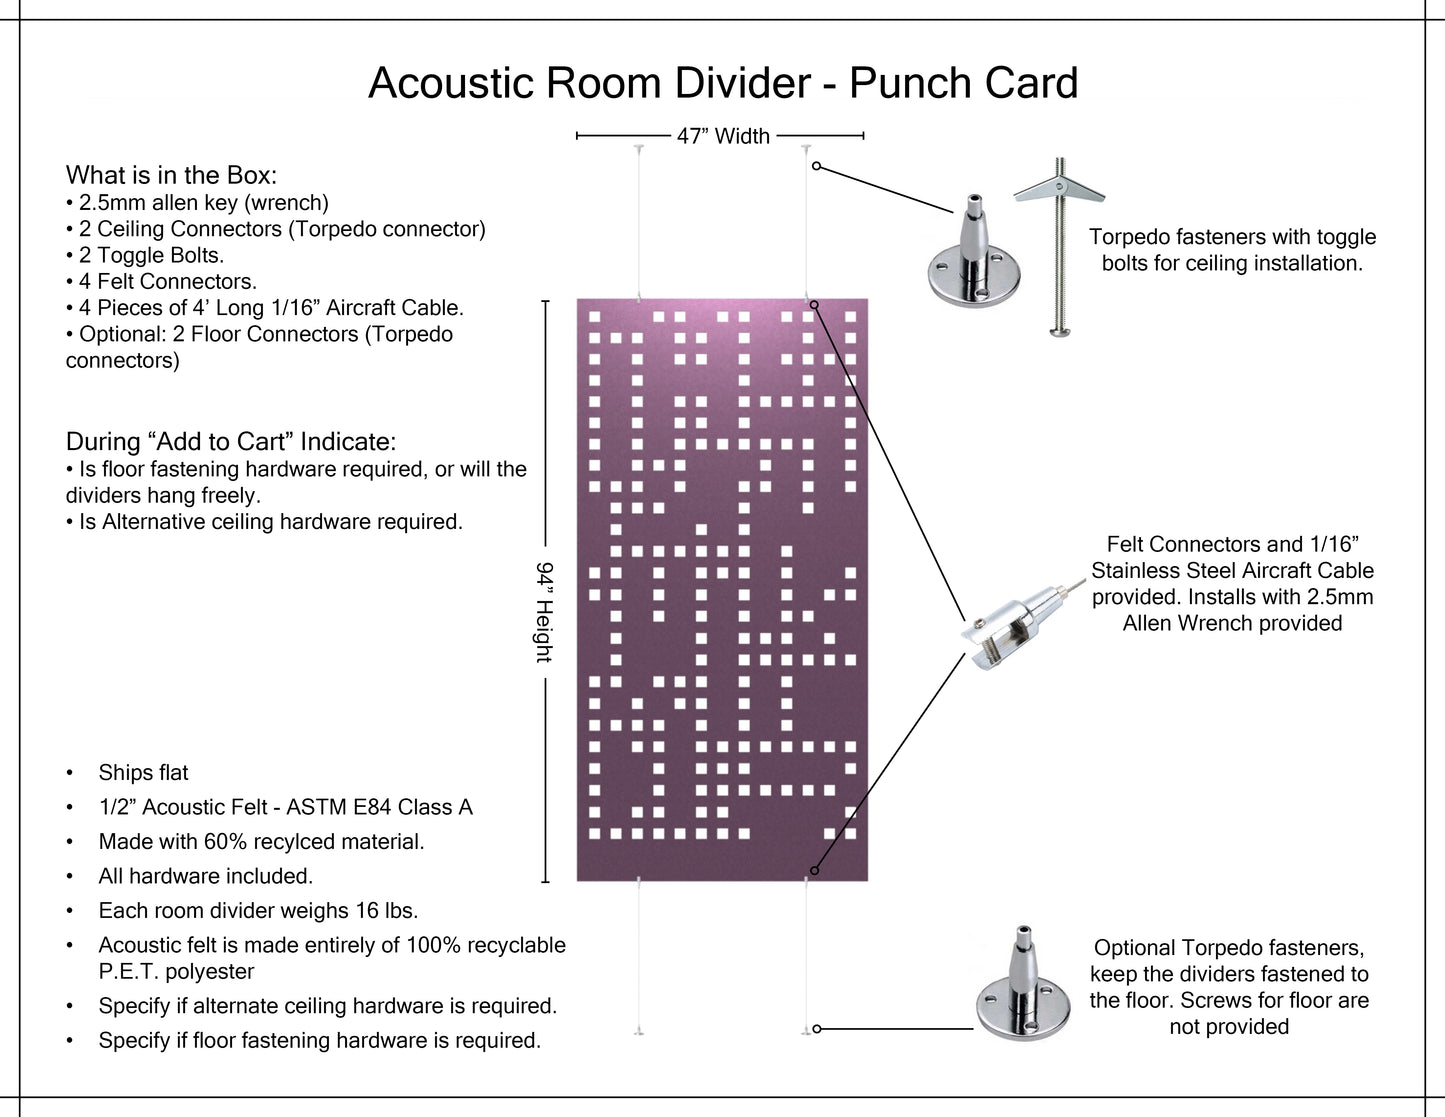 4x8 Acoustic Room Divider - Punch Card